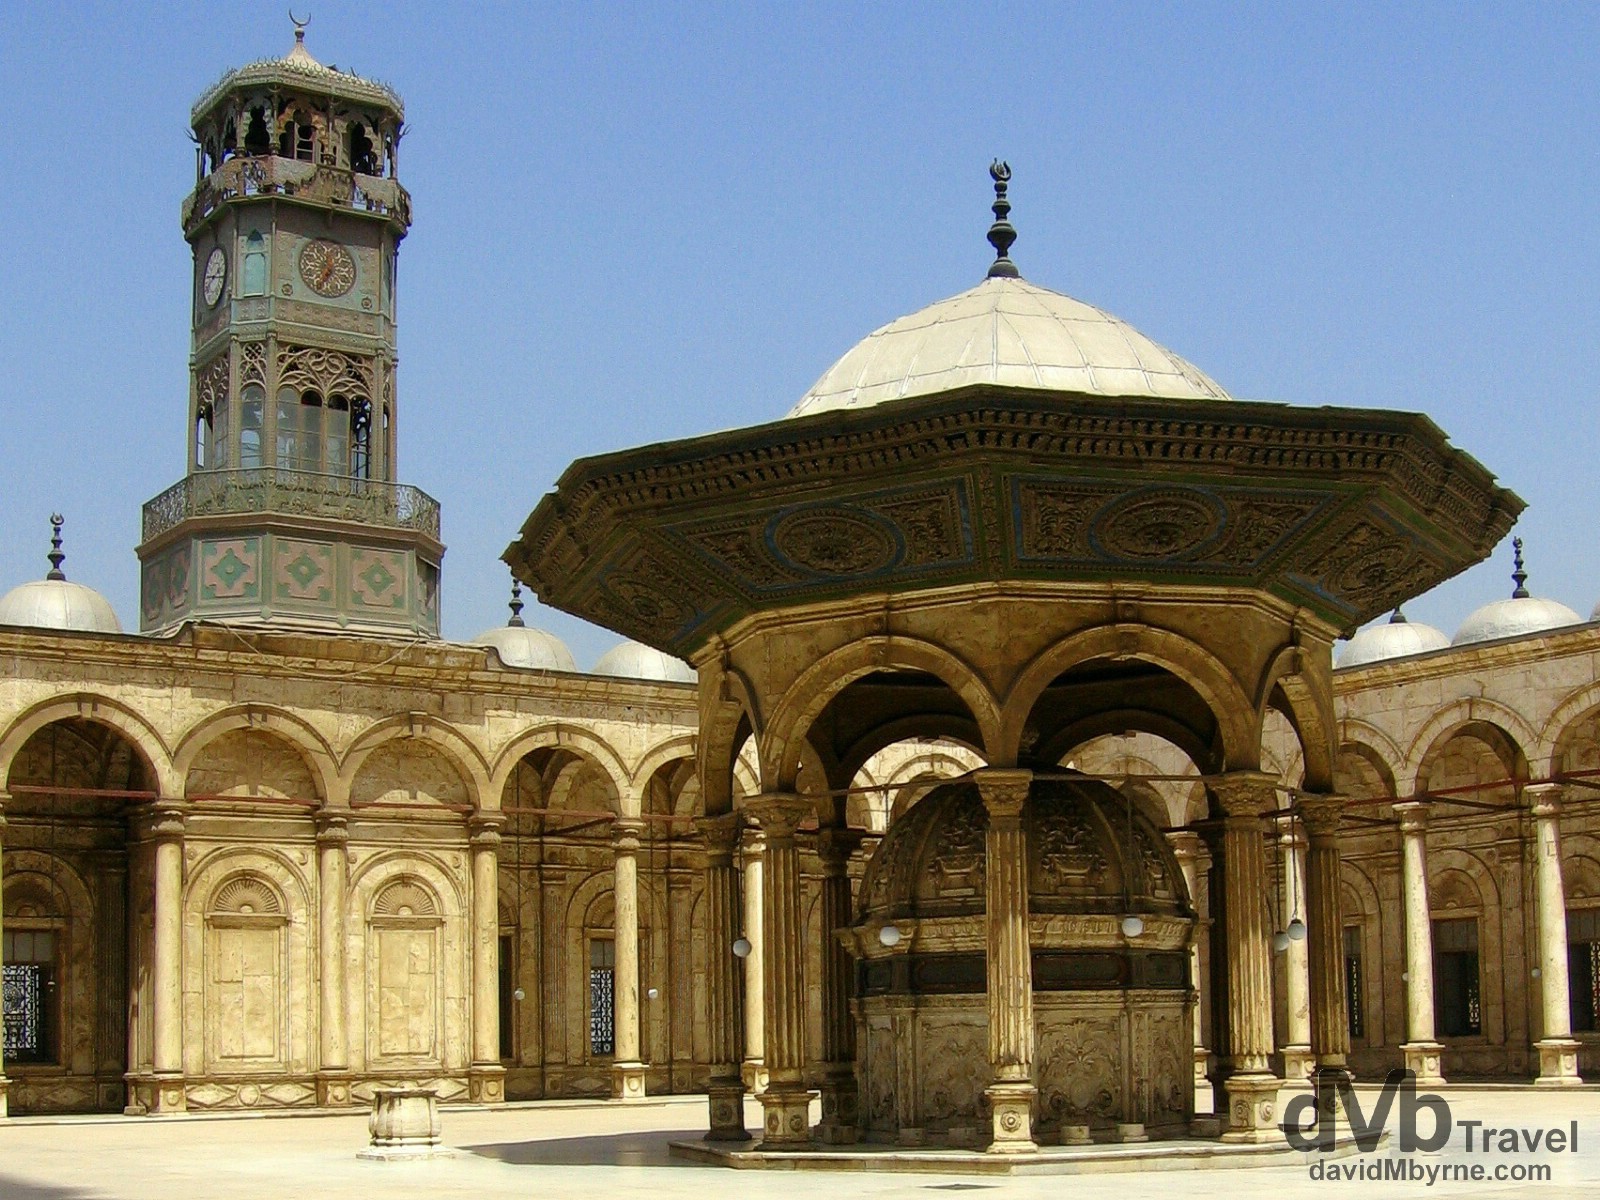 The marble-heavy external courtyard of the Muhammad Ali Mosque of the Saladin Citadel in Cairo, Egypt. April 14, 2008. 